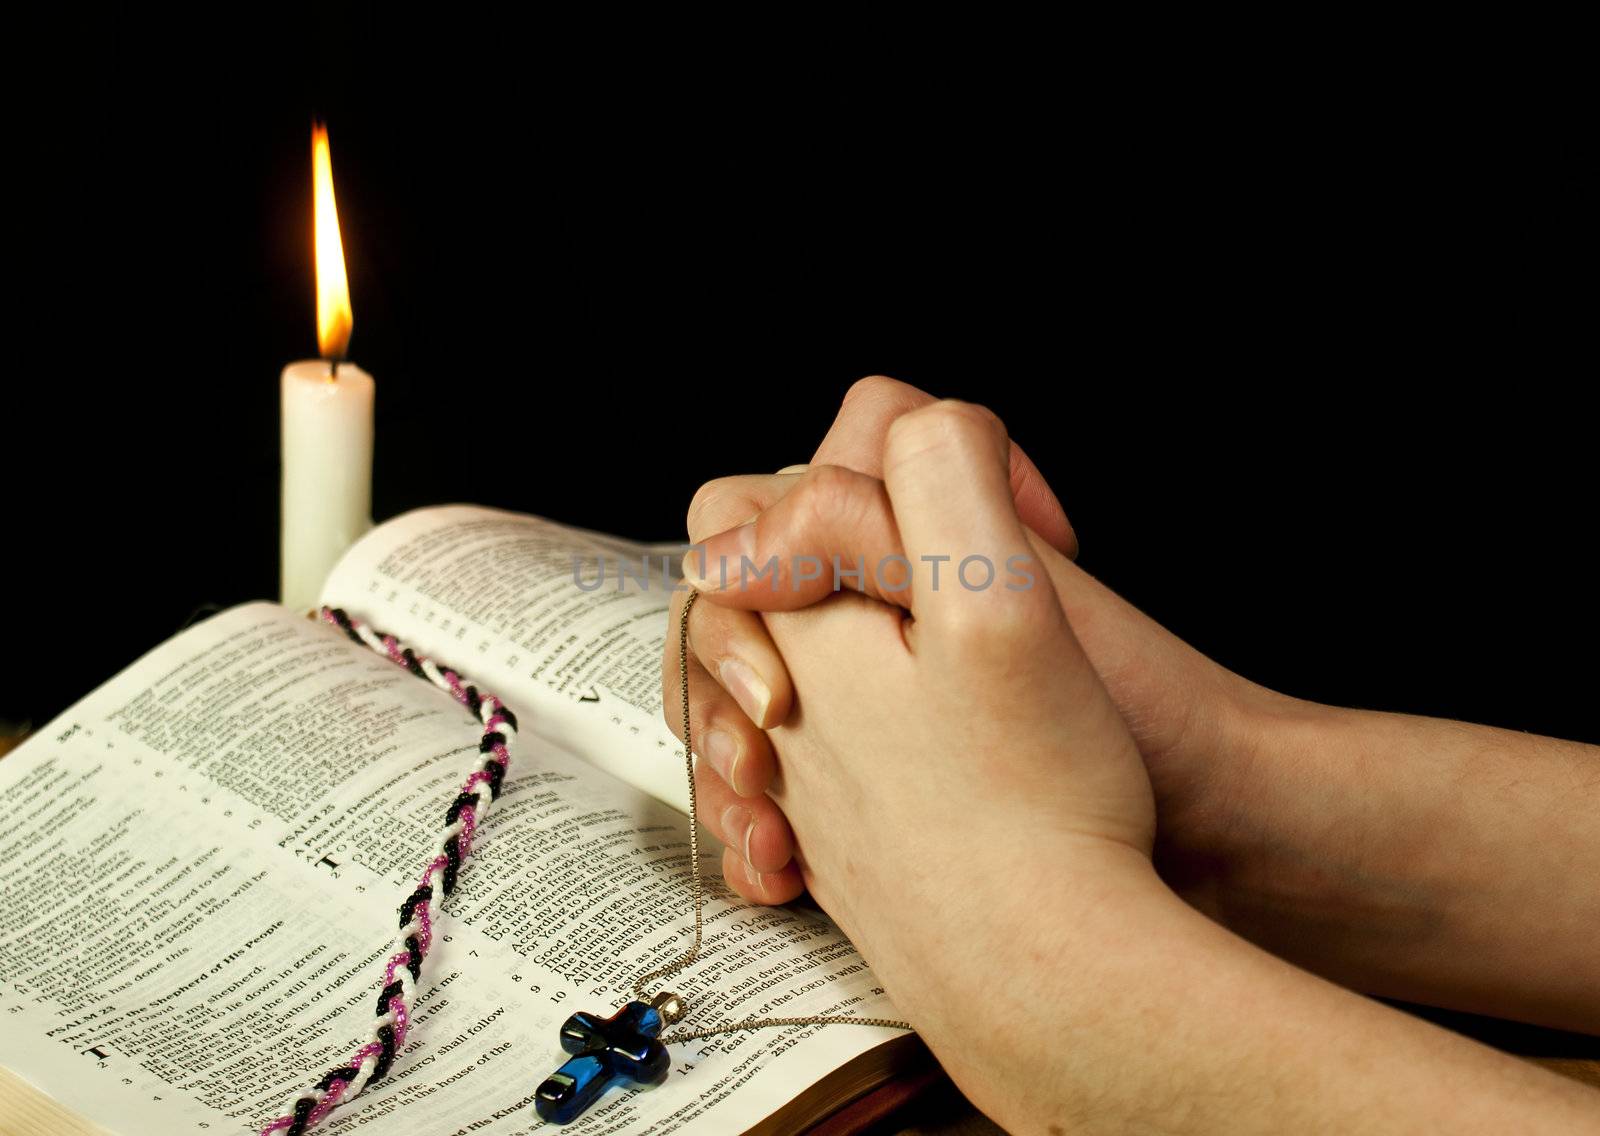 Open Bible with burning candle and hands of praying woman by AndreyKr